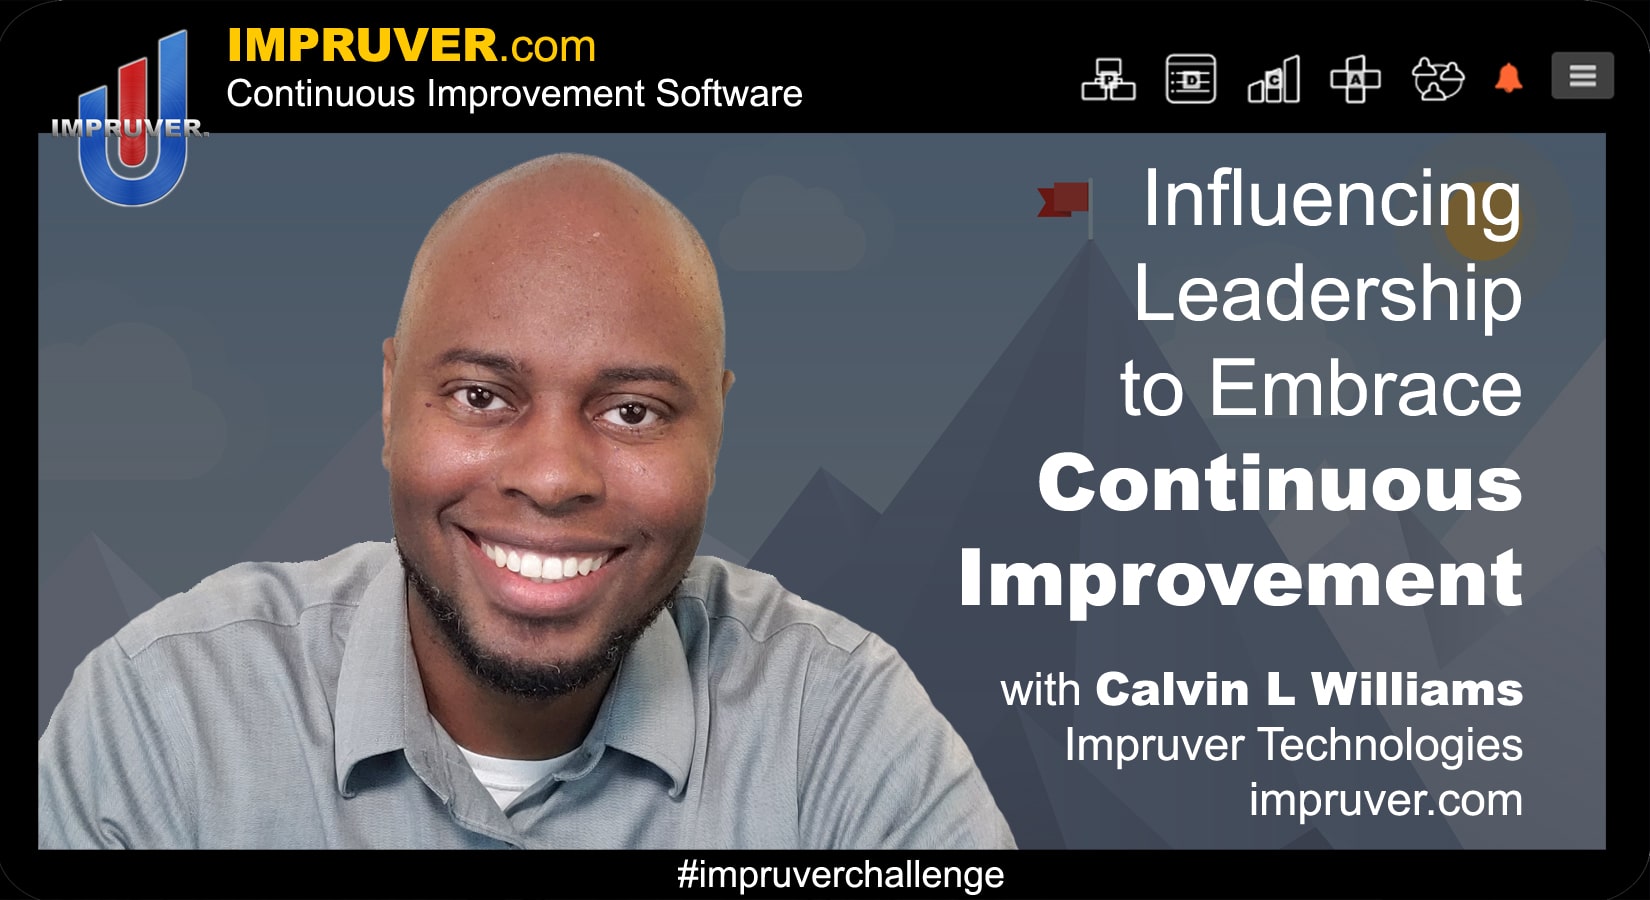 Impruver Influencing Leaders for Continuous Improvement